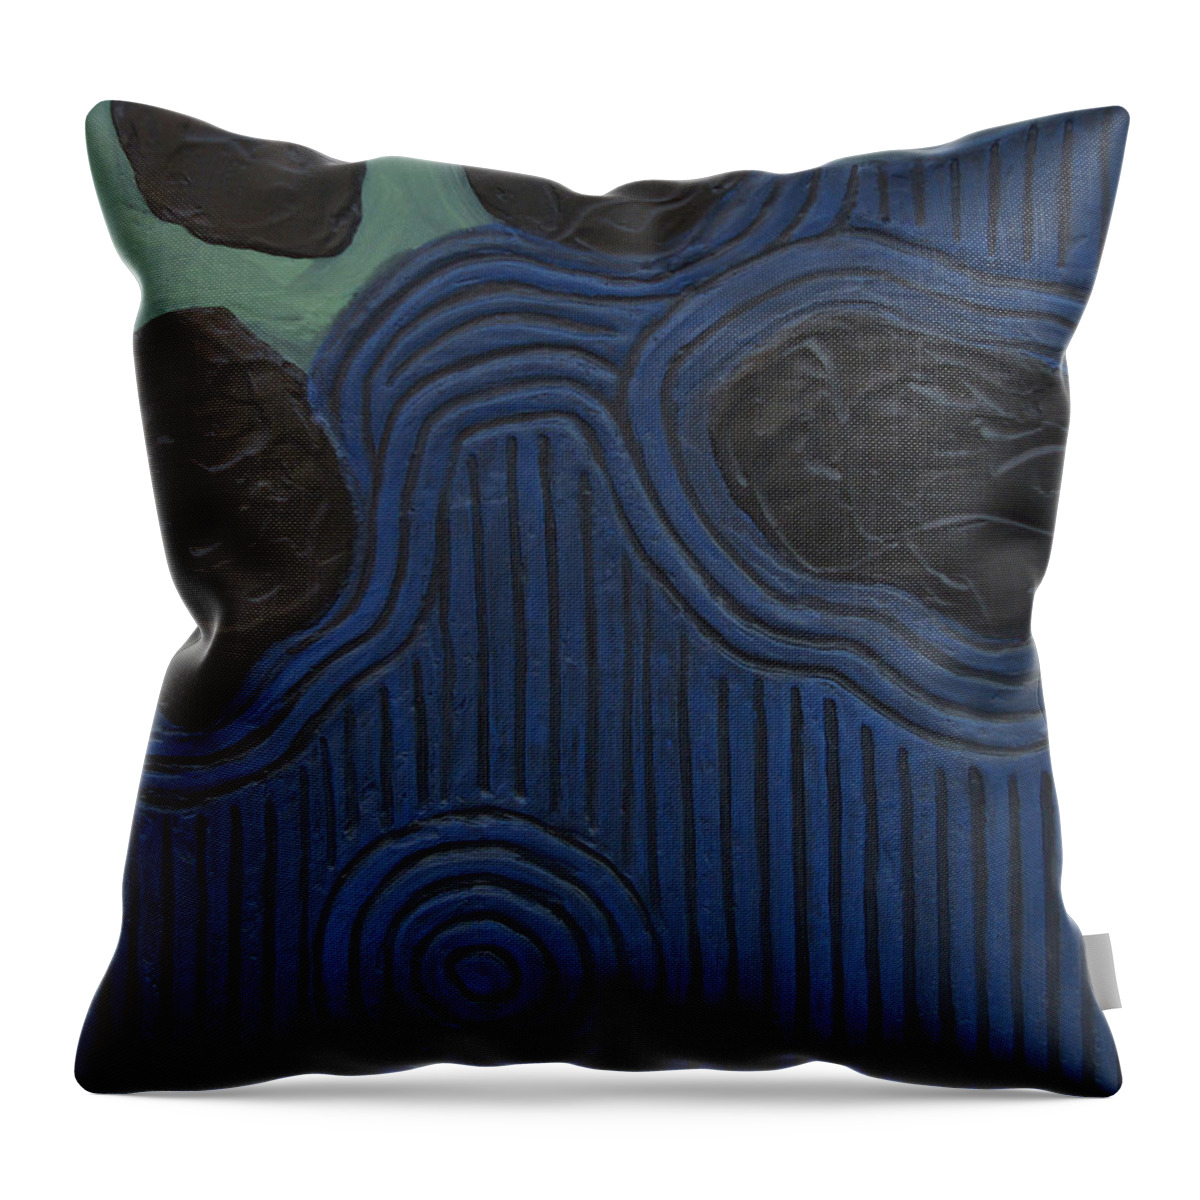 Japan Throw Pillow featuring the painting Whirlpool by Carrie MaKenna